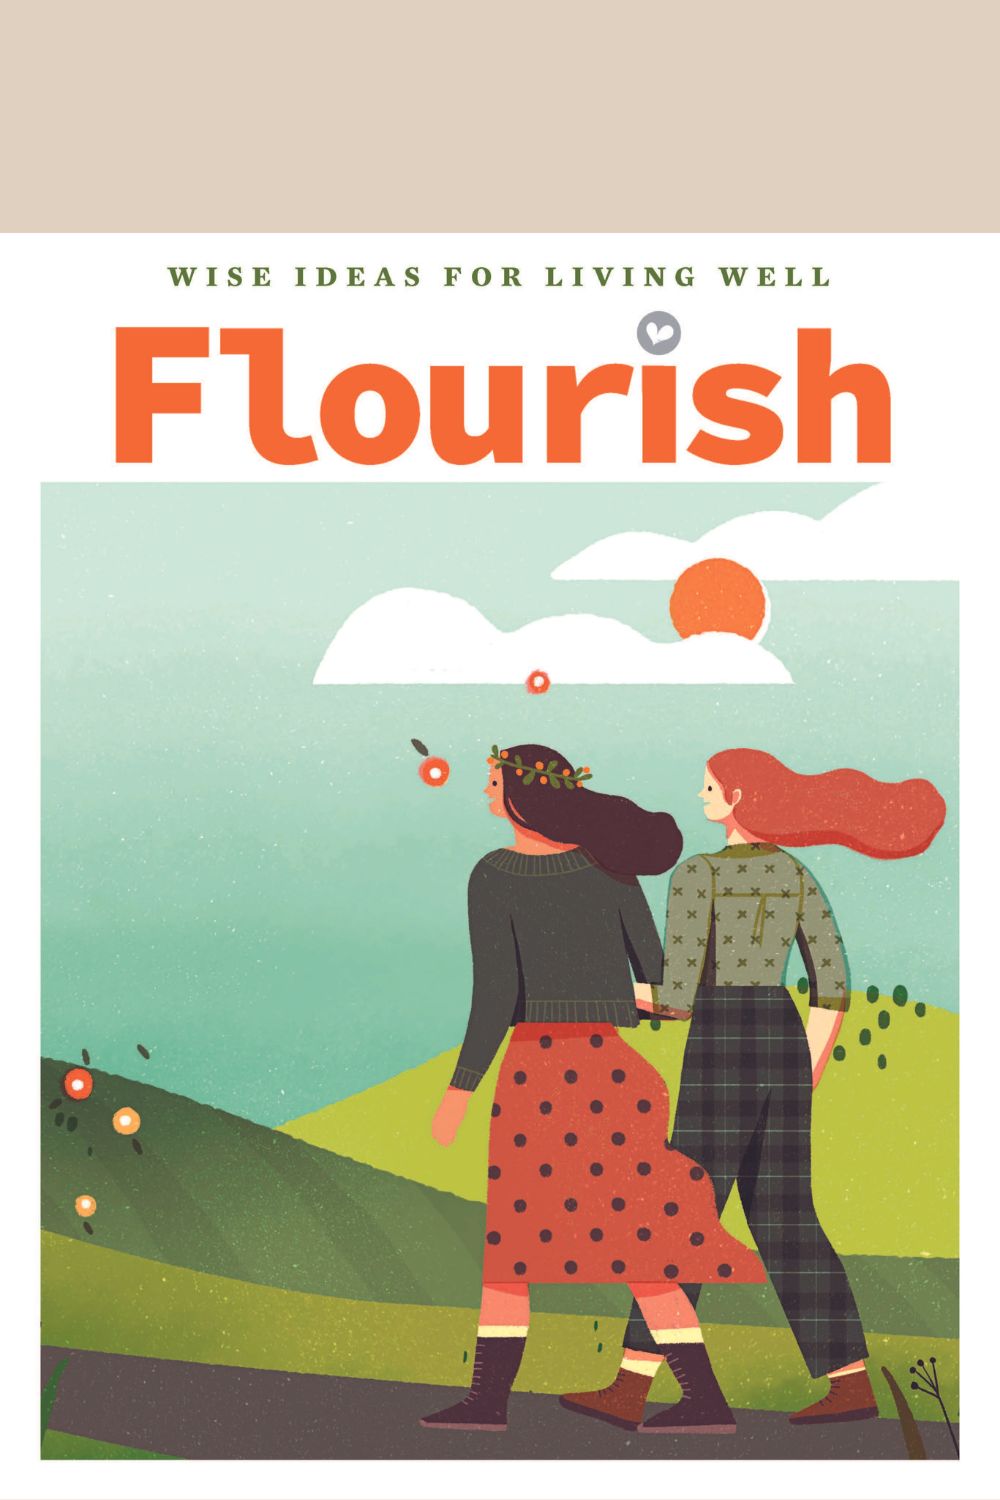 Flourish Volume 2 - Wise Ideas for Living Well cover